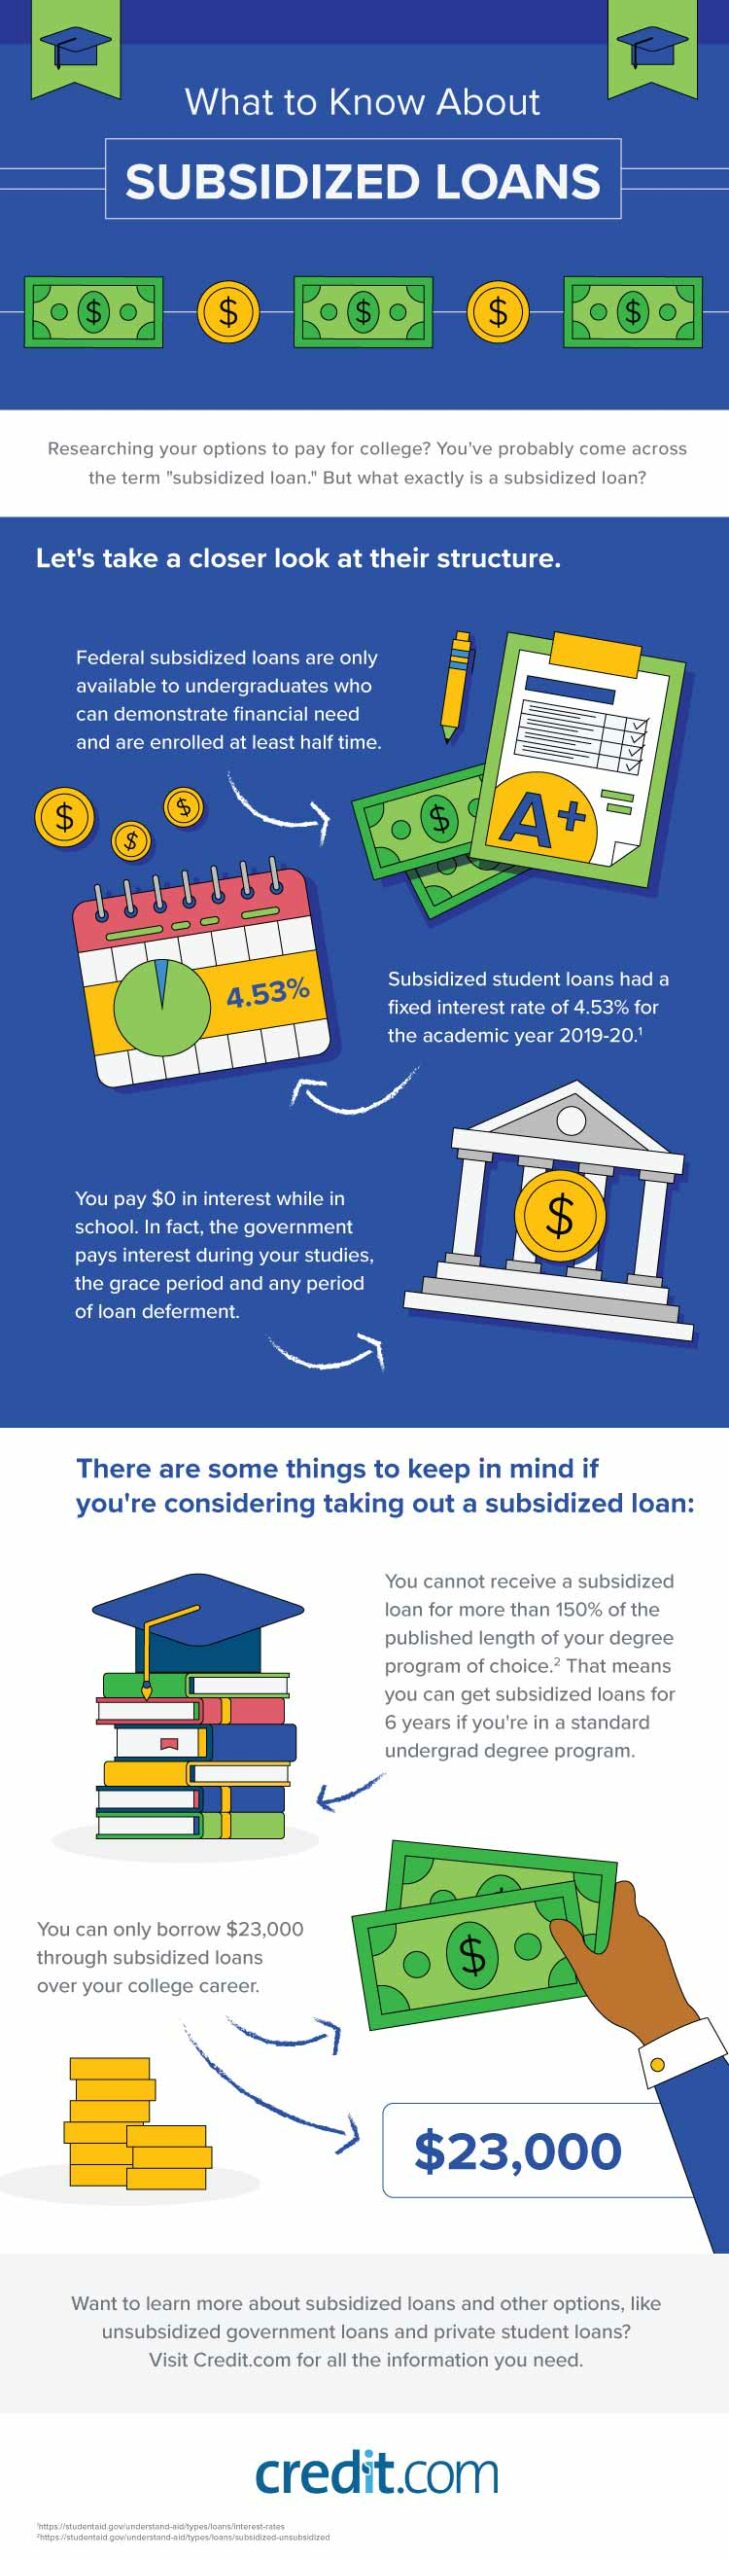 Infographic outlining what to know about subsidized loans, including their structure, requirements, and qualifications. 